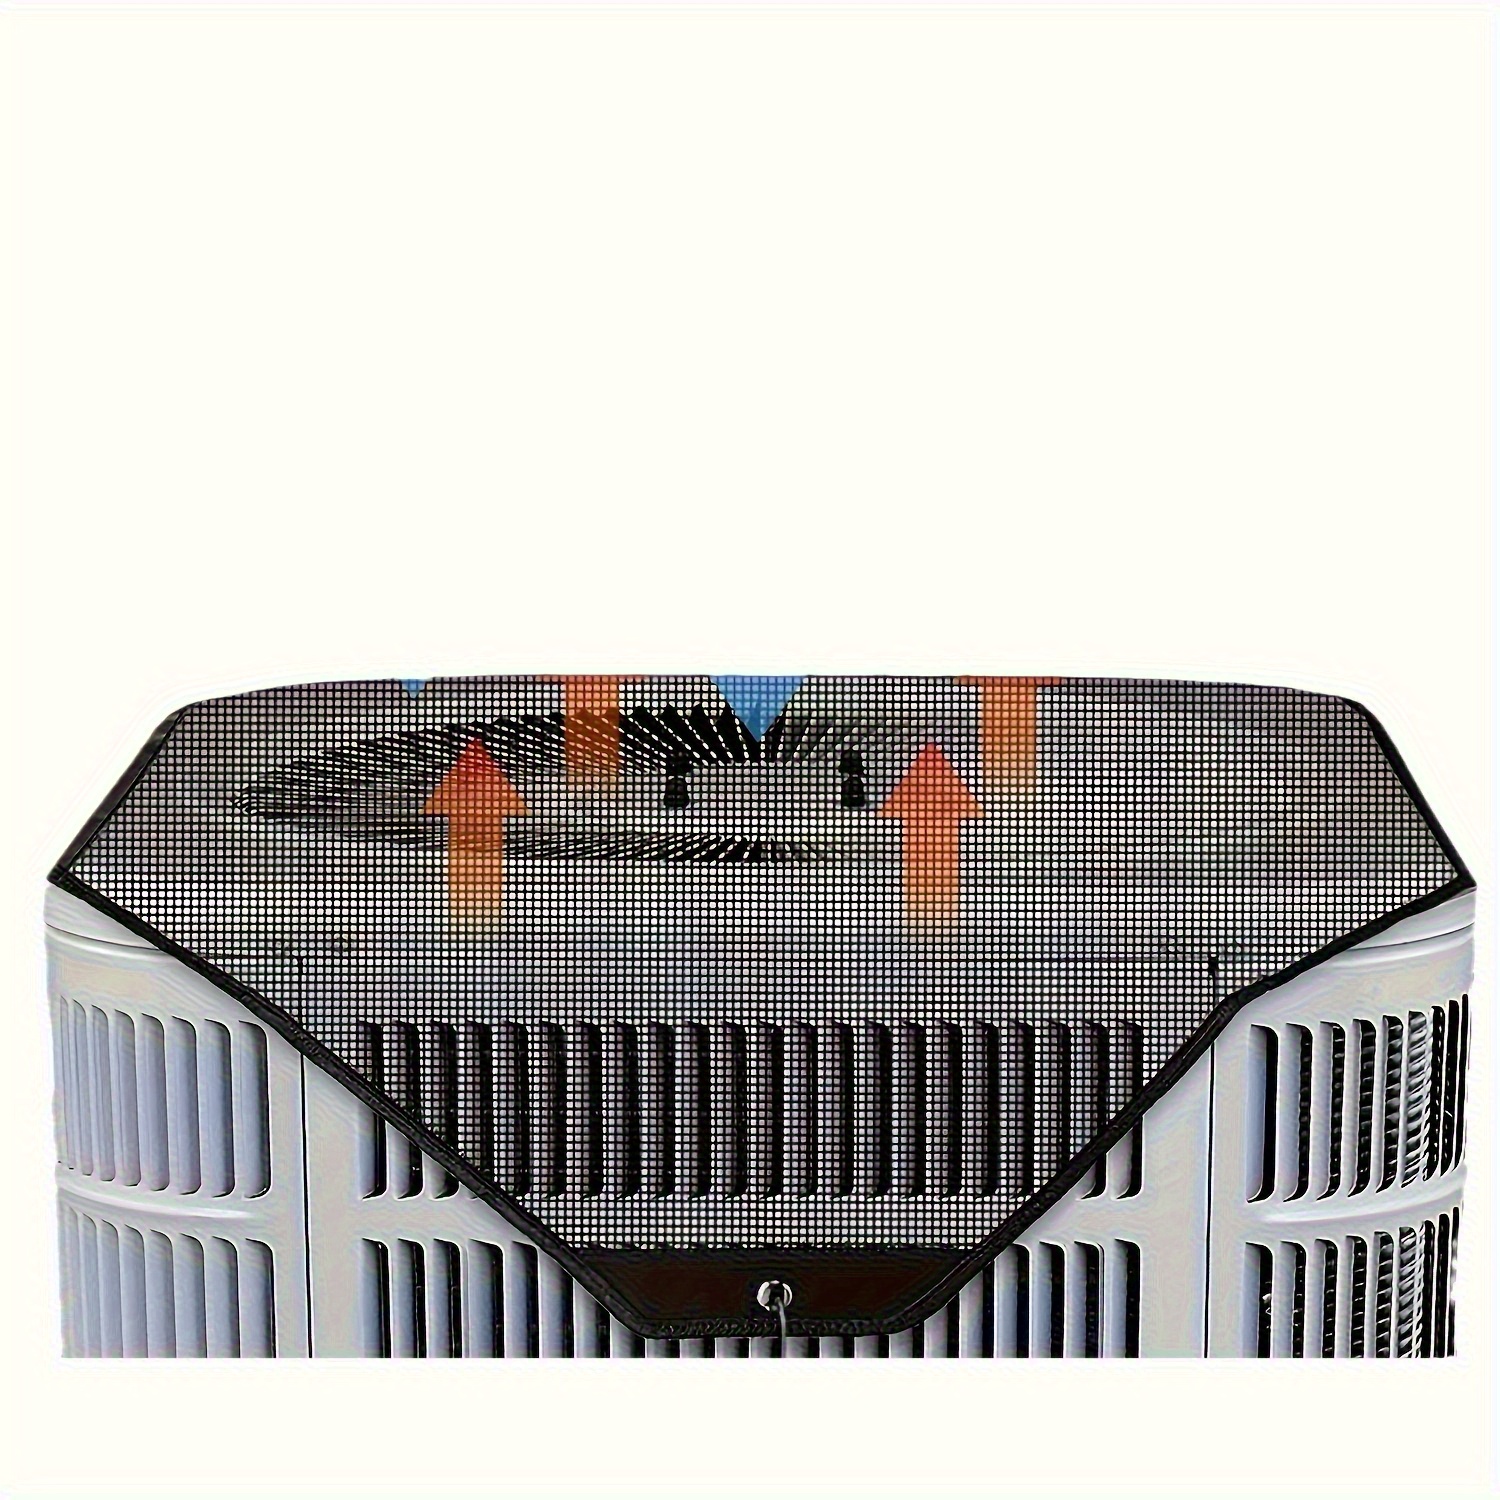 

1pc, Durable Outdoor Air Conditioner Cover Water Resistant Fabric, Windproof Design, Protects Against Dust And Cold Air, Pvc Mesh For Ventilation